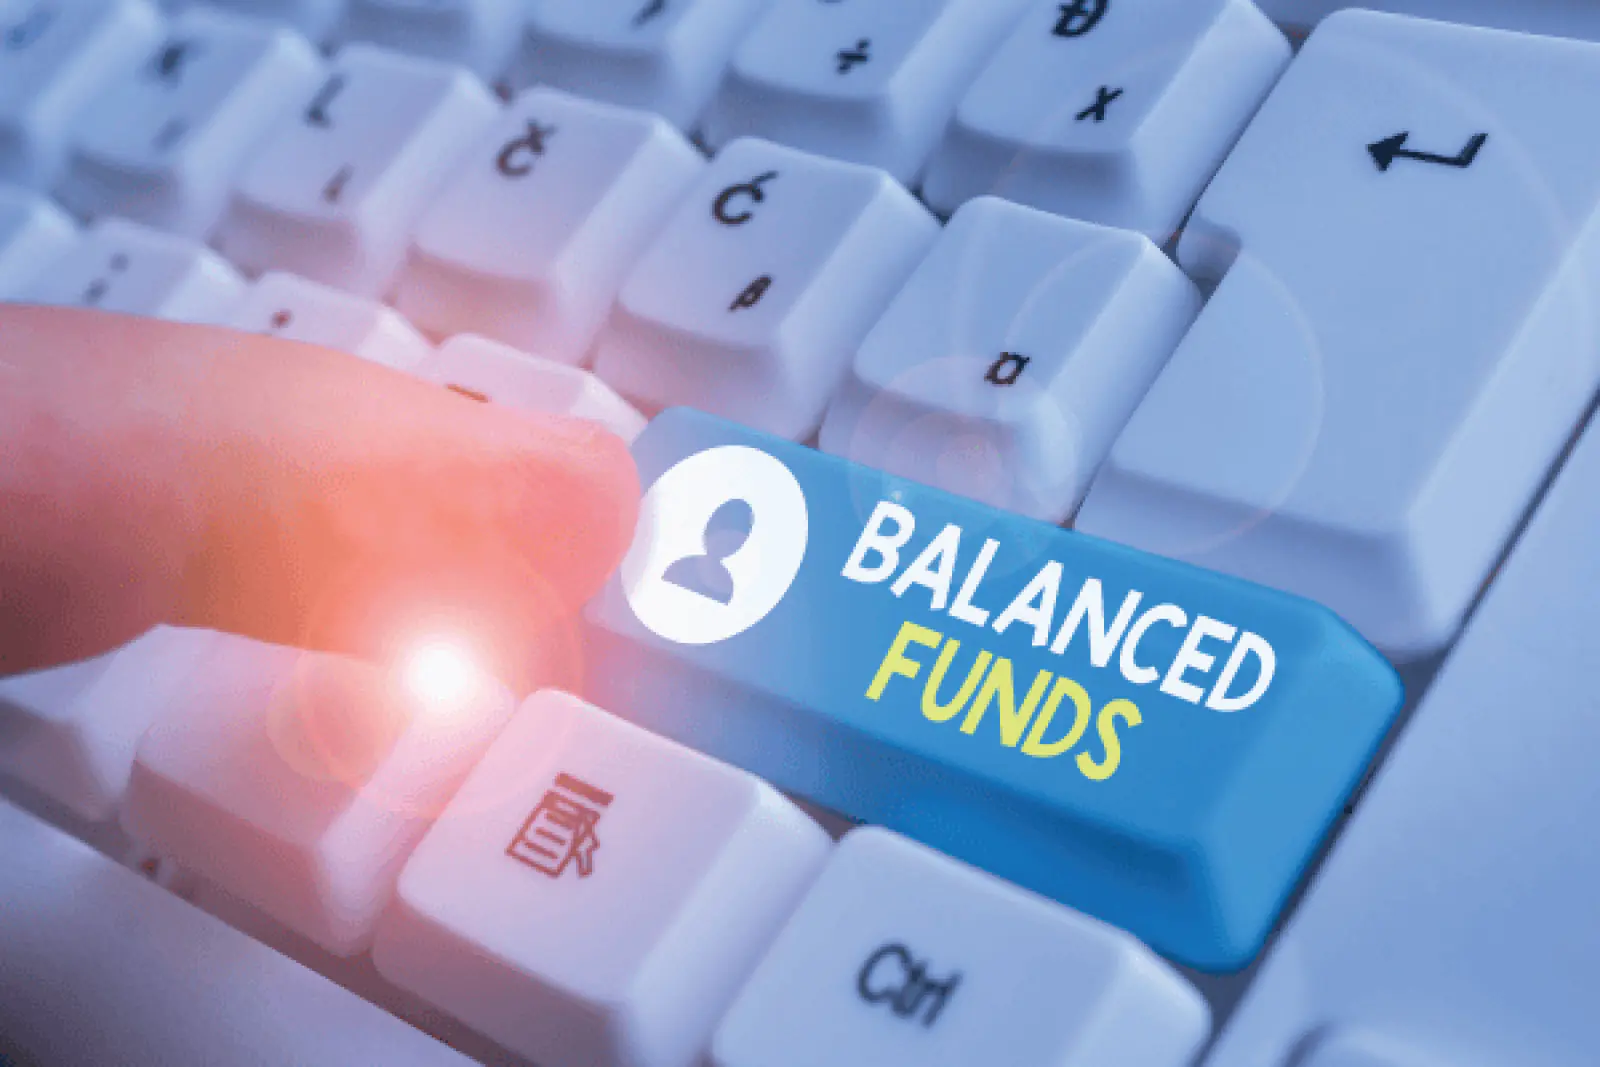 Nivesh Mantra: Balanced funds and multiasset funds are useful tools for the low-cost market